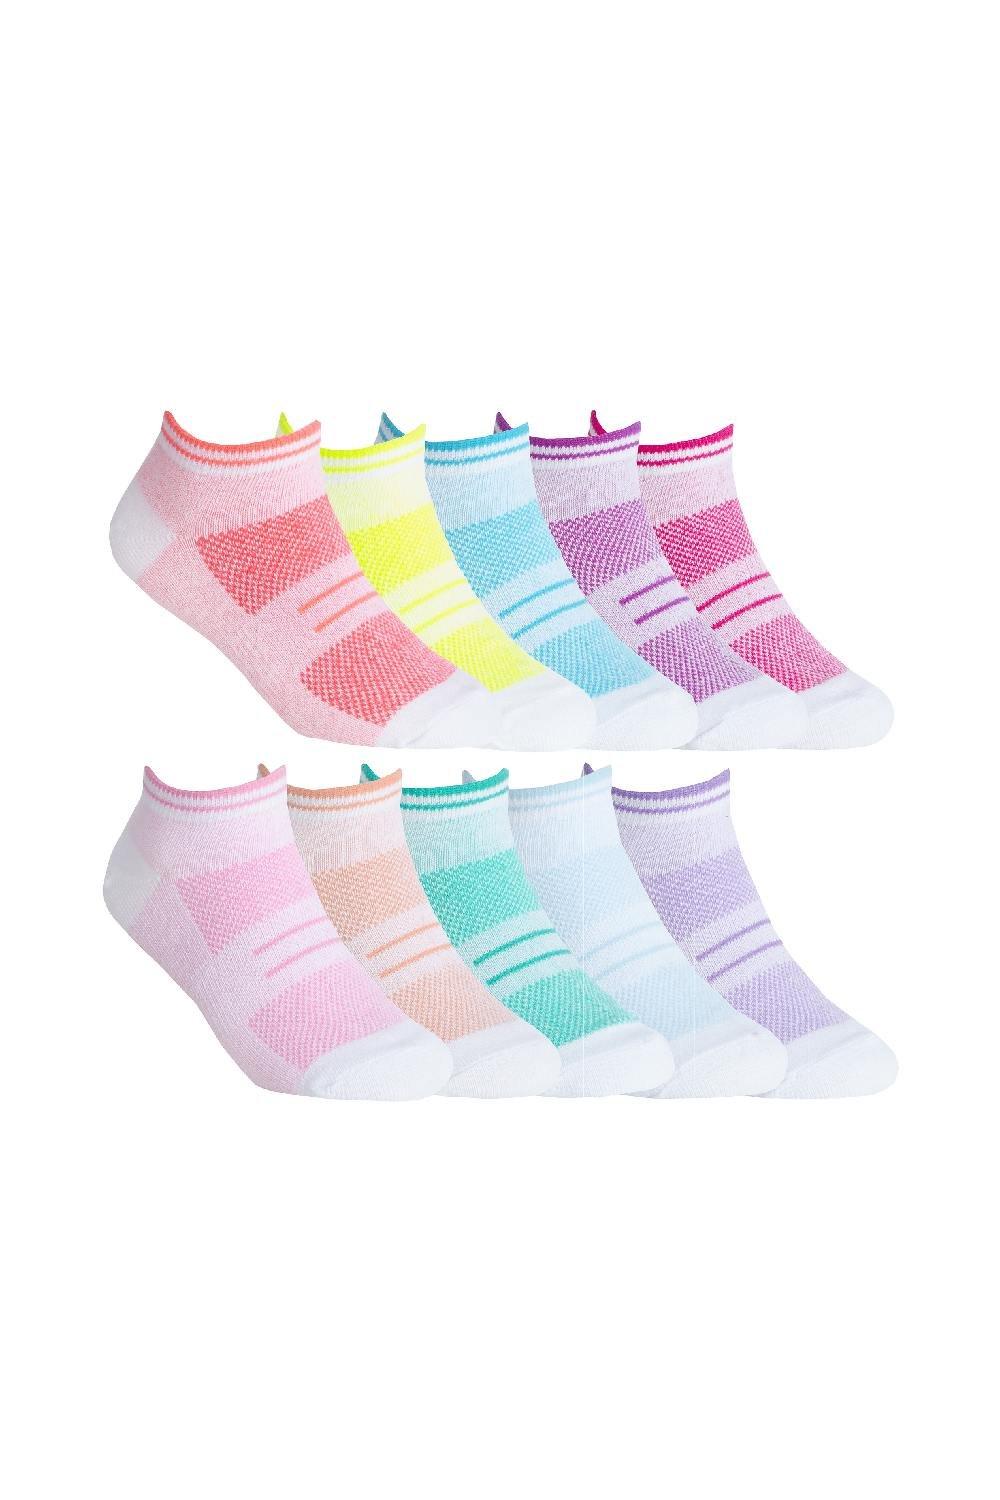 10 Pairs Low Cut Colourful Cotton Rich Breathable Trainer Socks